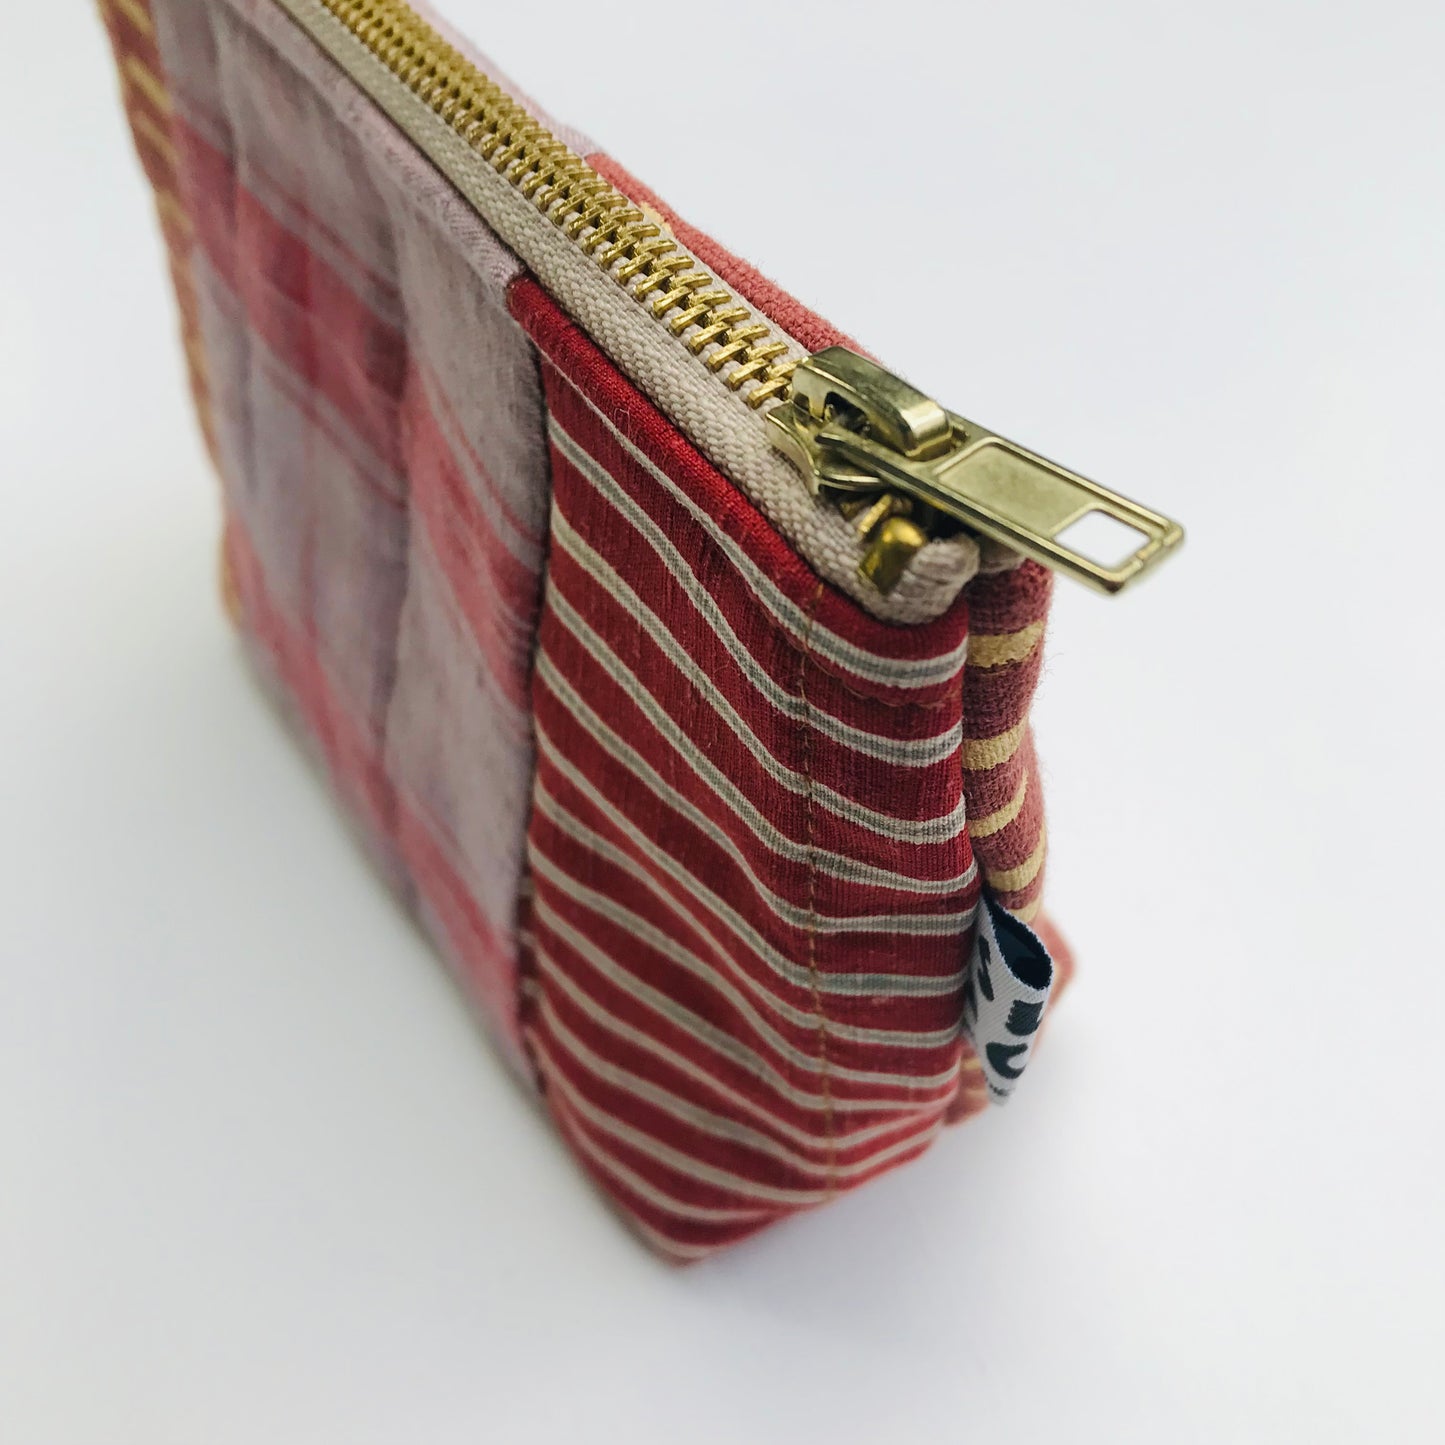 QUILTED POUCH